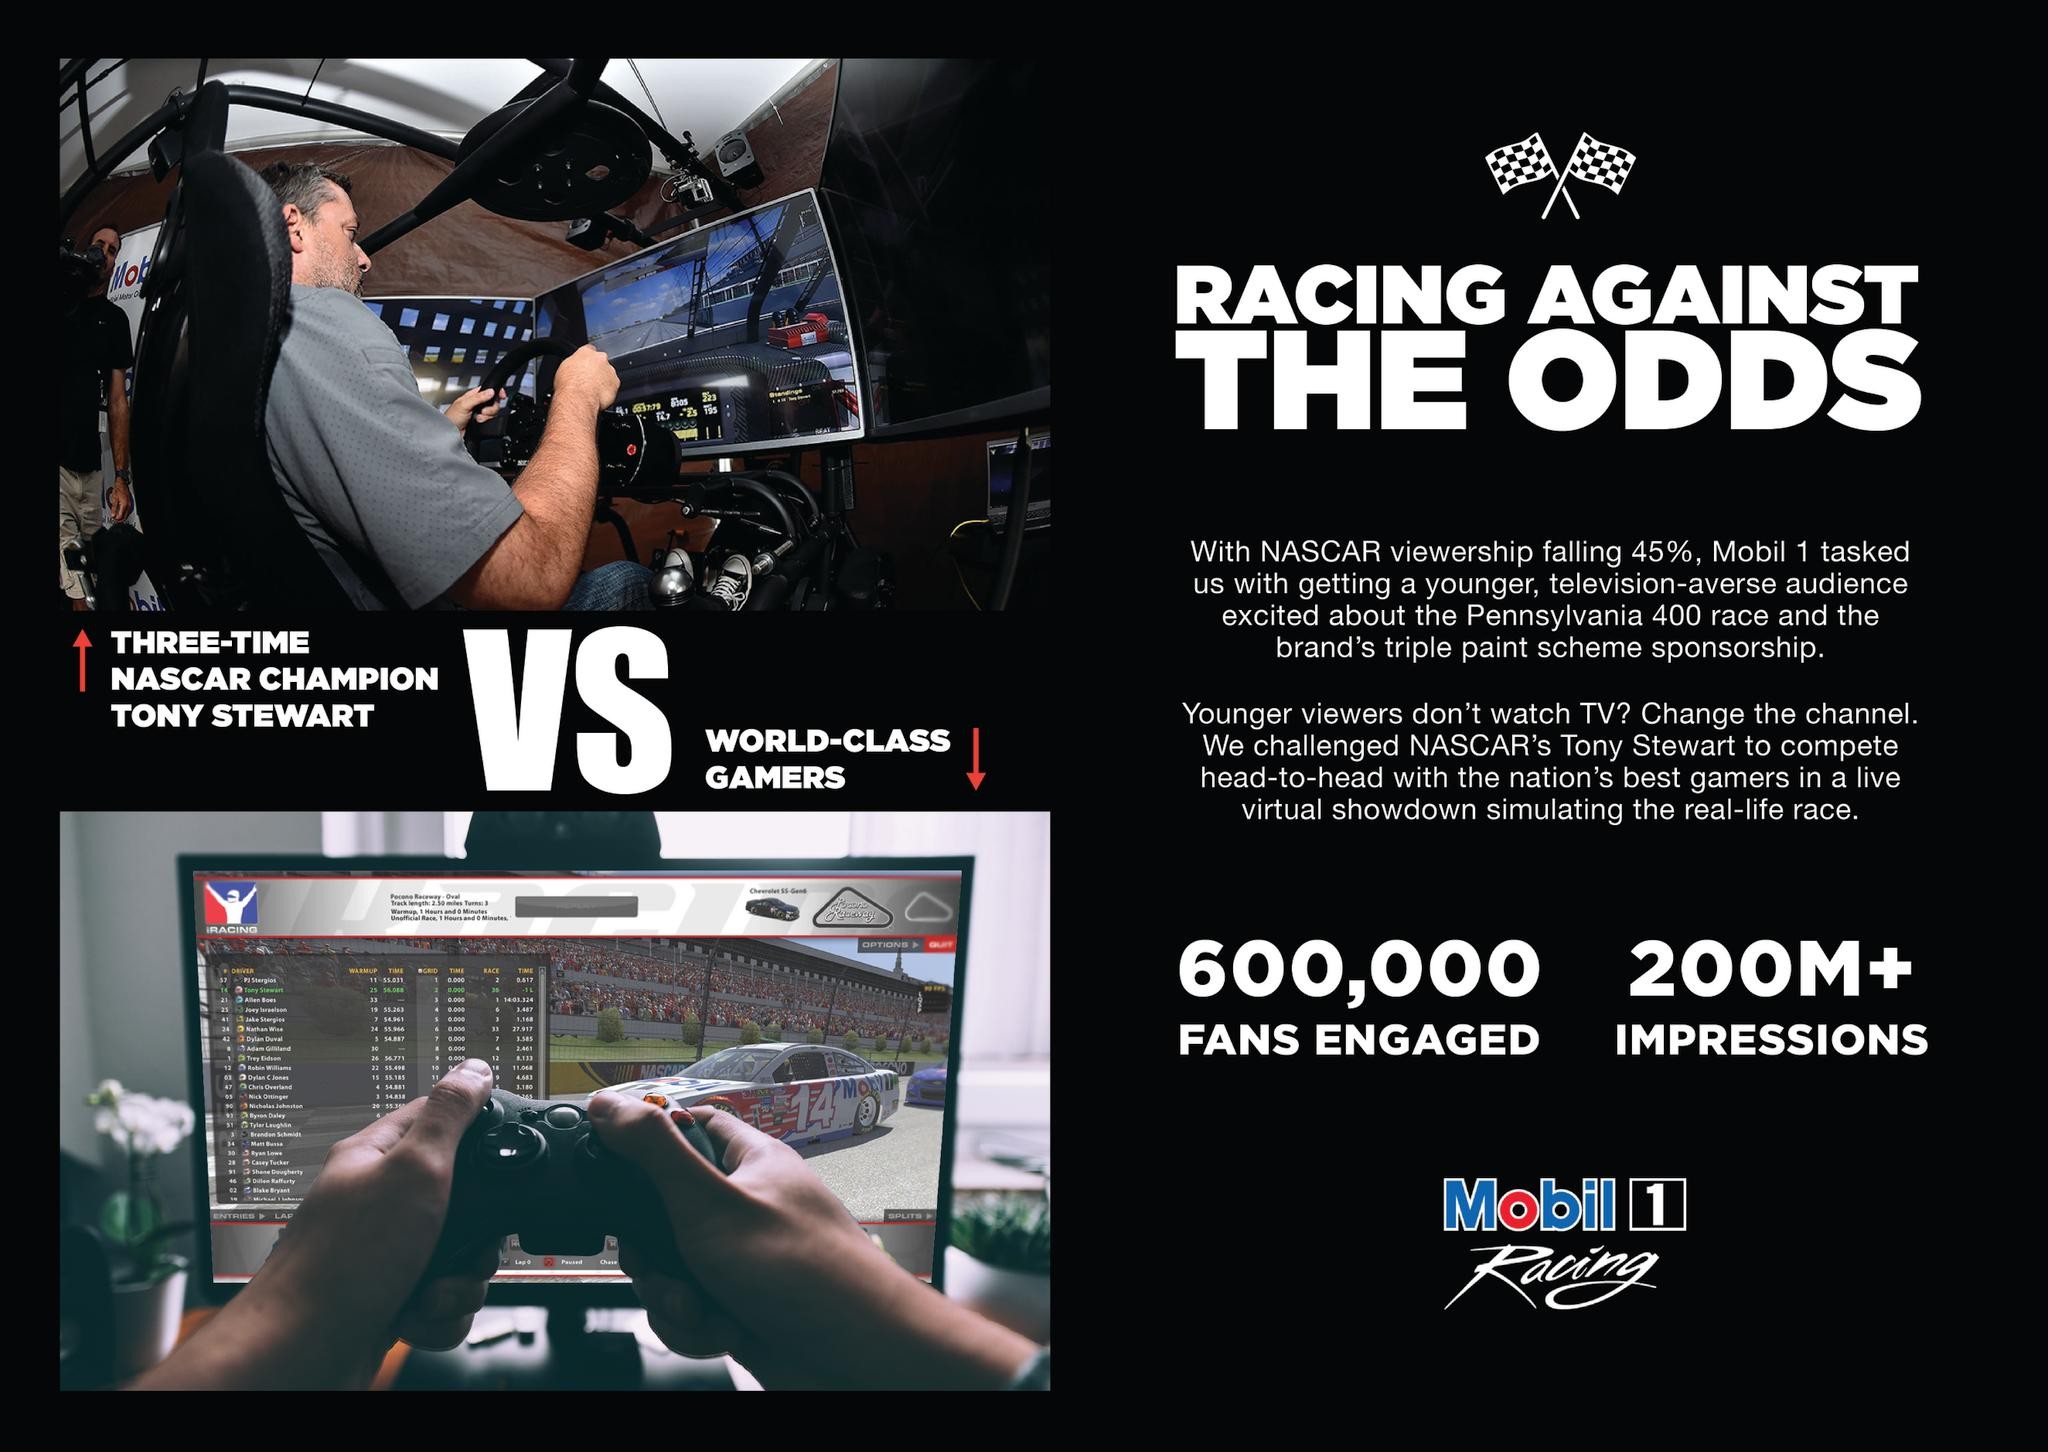 Mobil 1: Racing Against the Odds